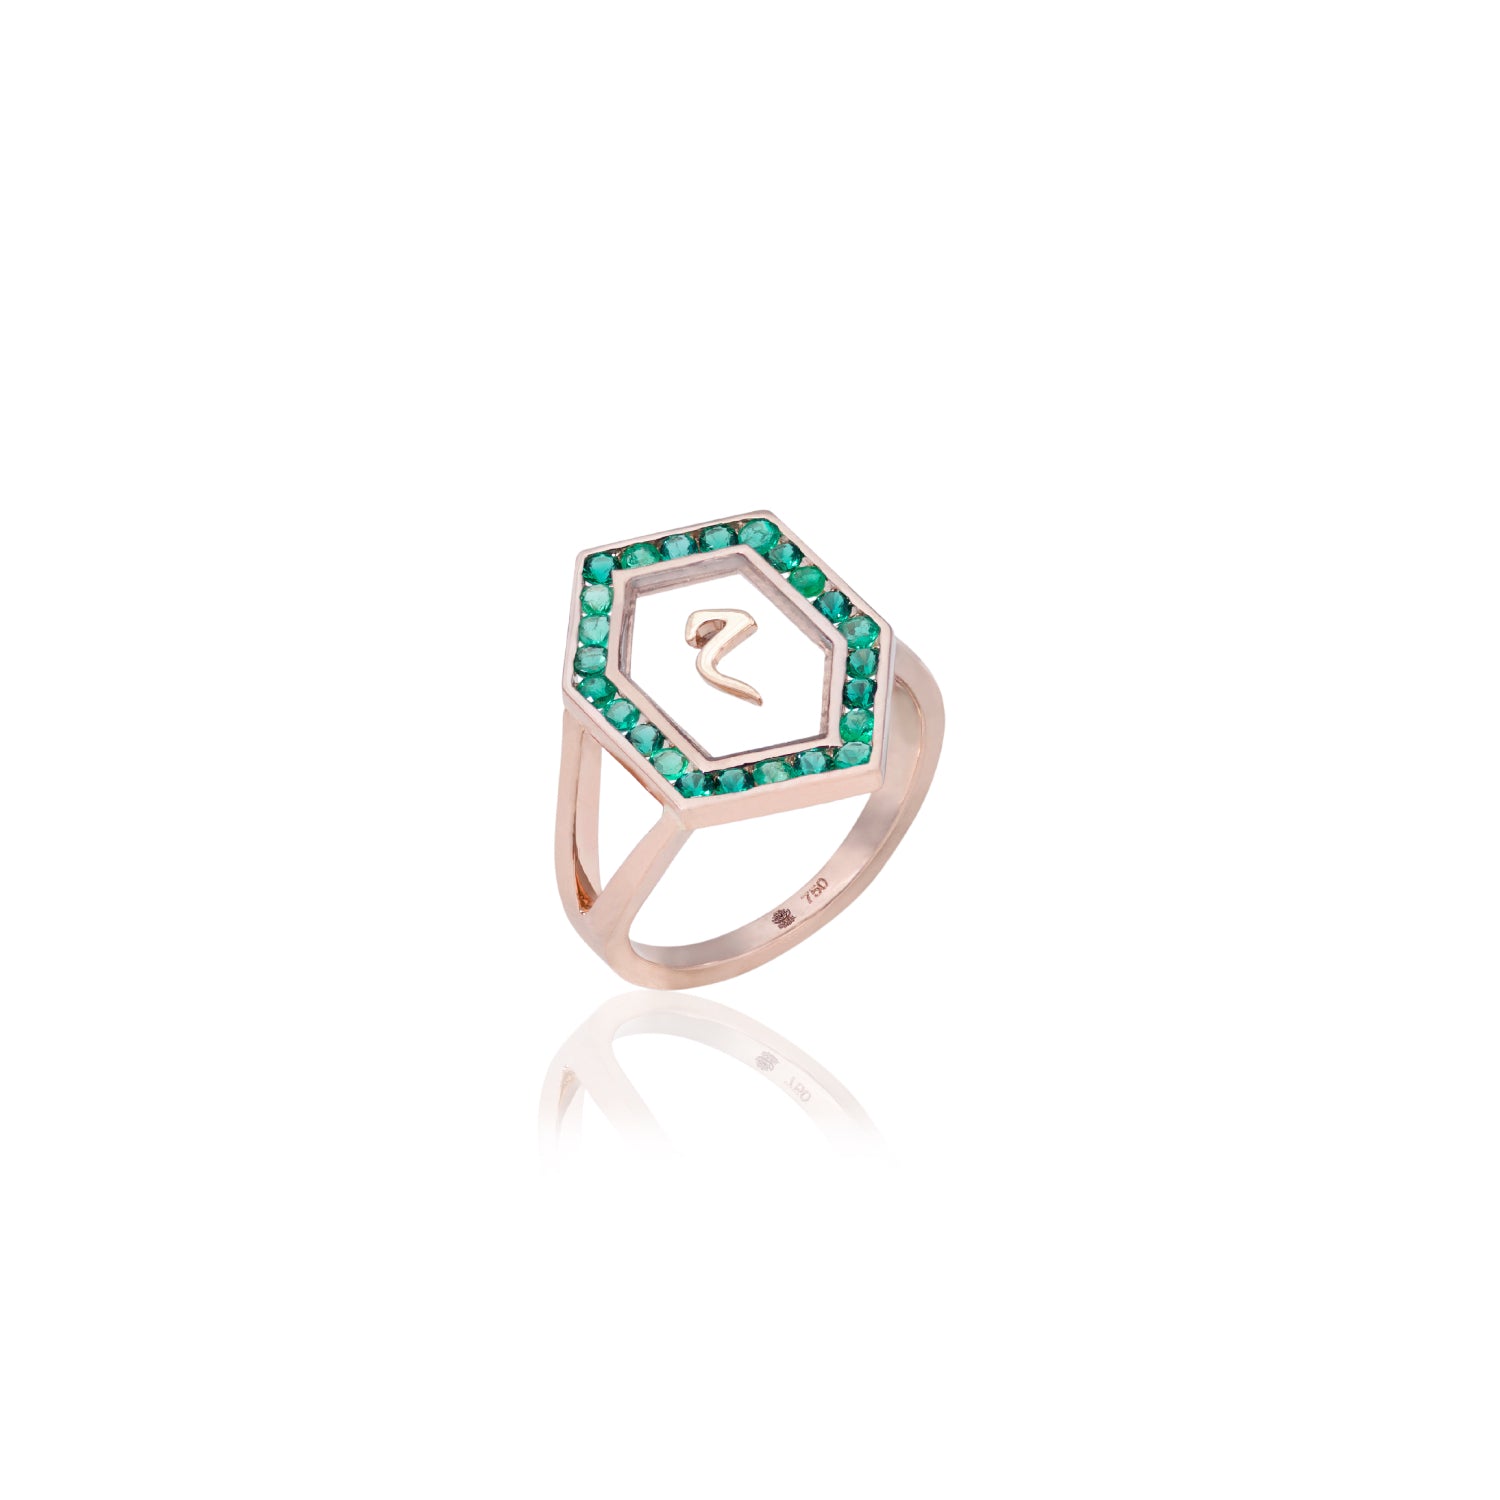 Qamoos 1.0 Letter م Emerald Ring in Rose Gold